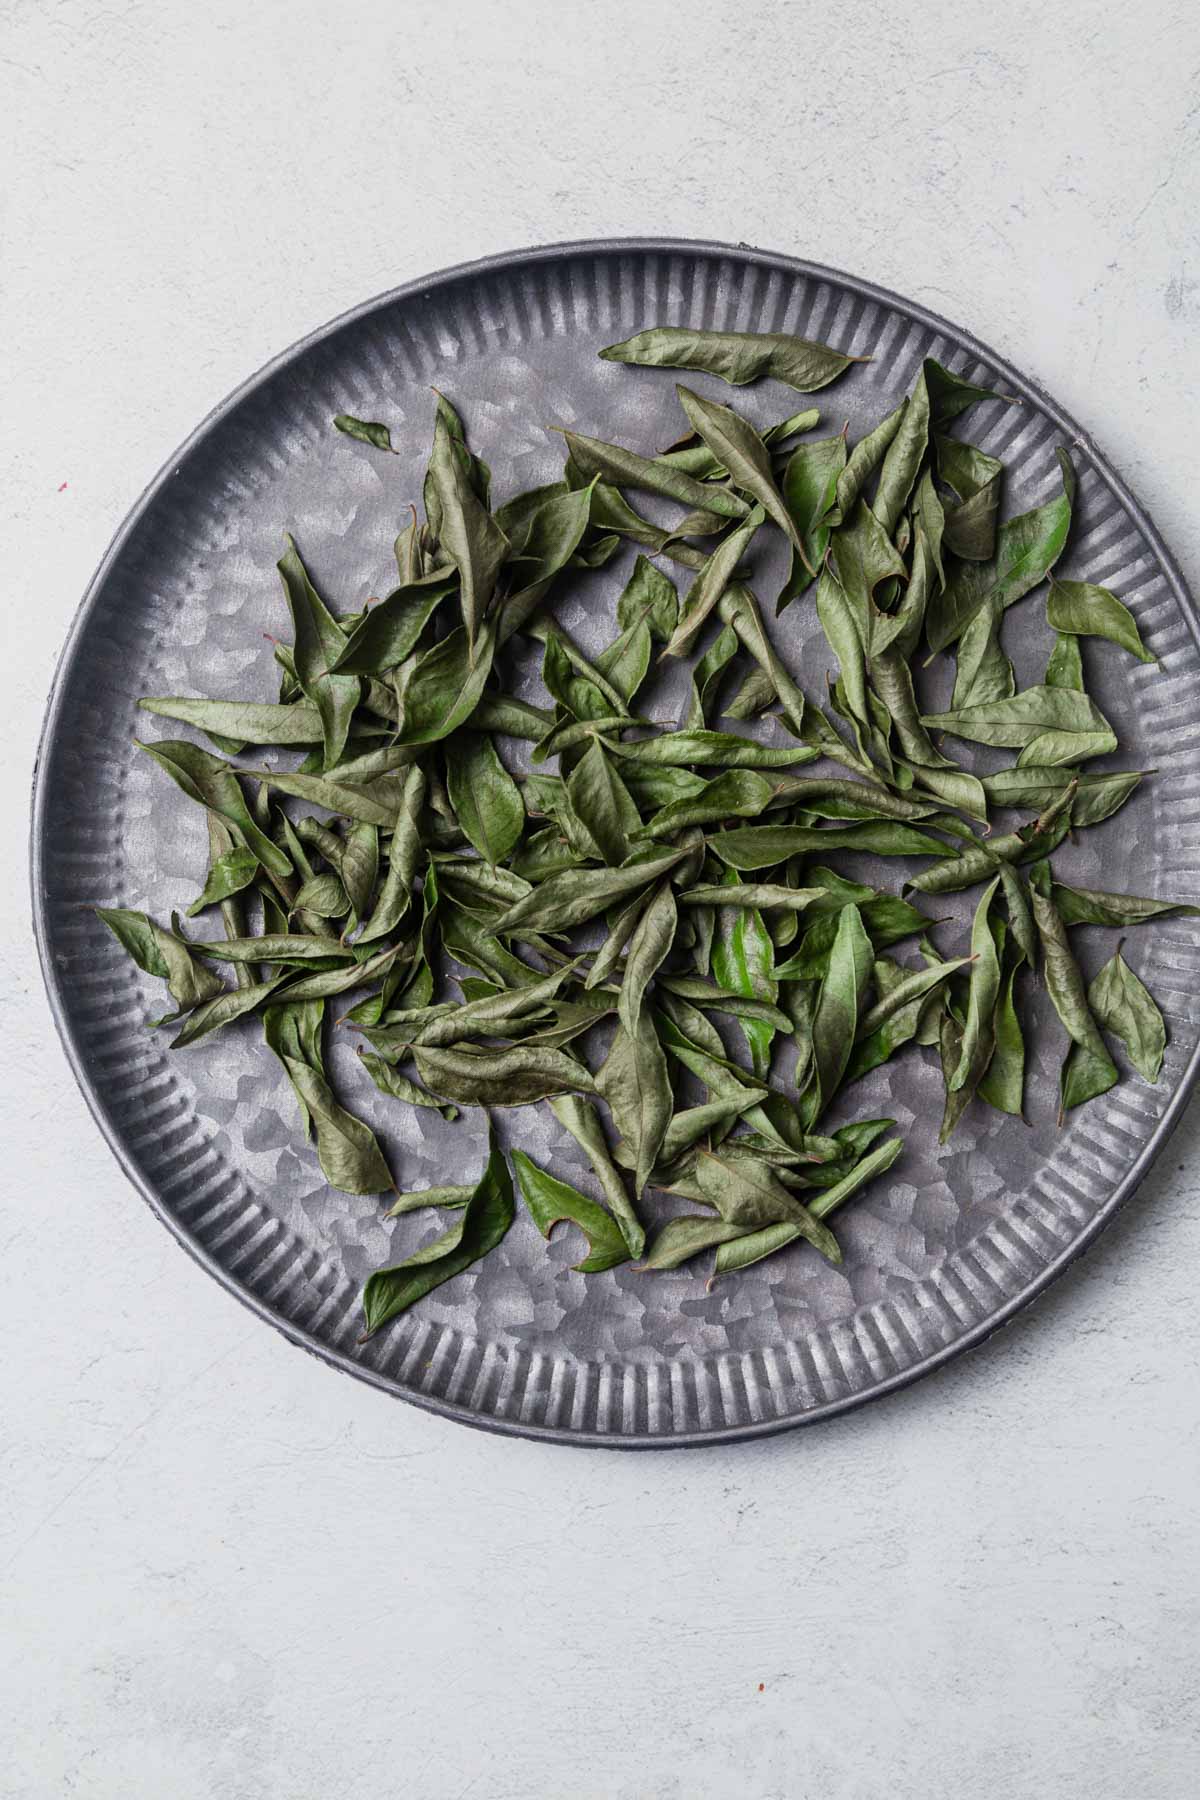 dried curry leaves on a grey tray.